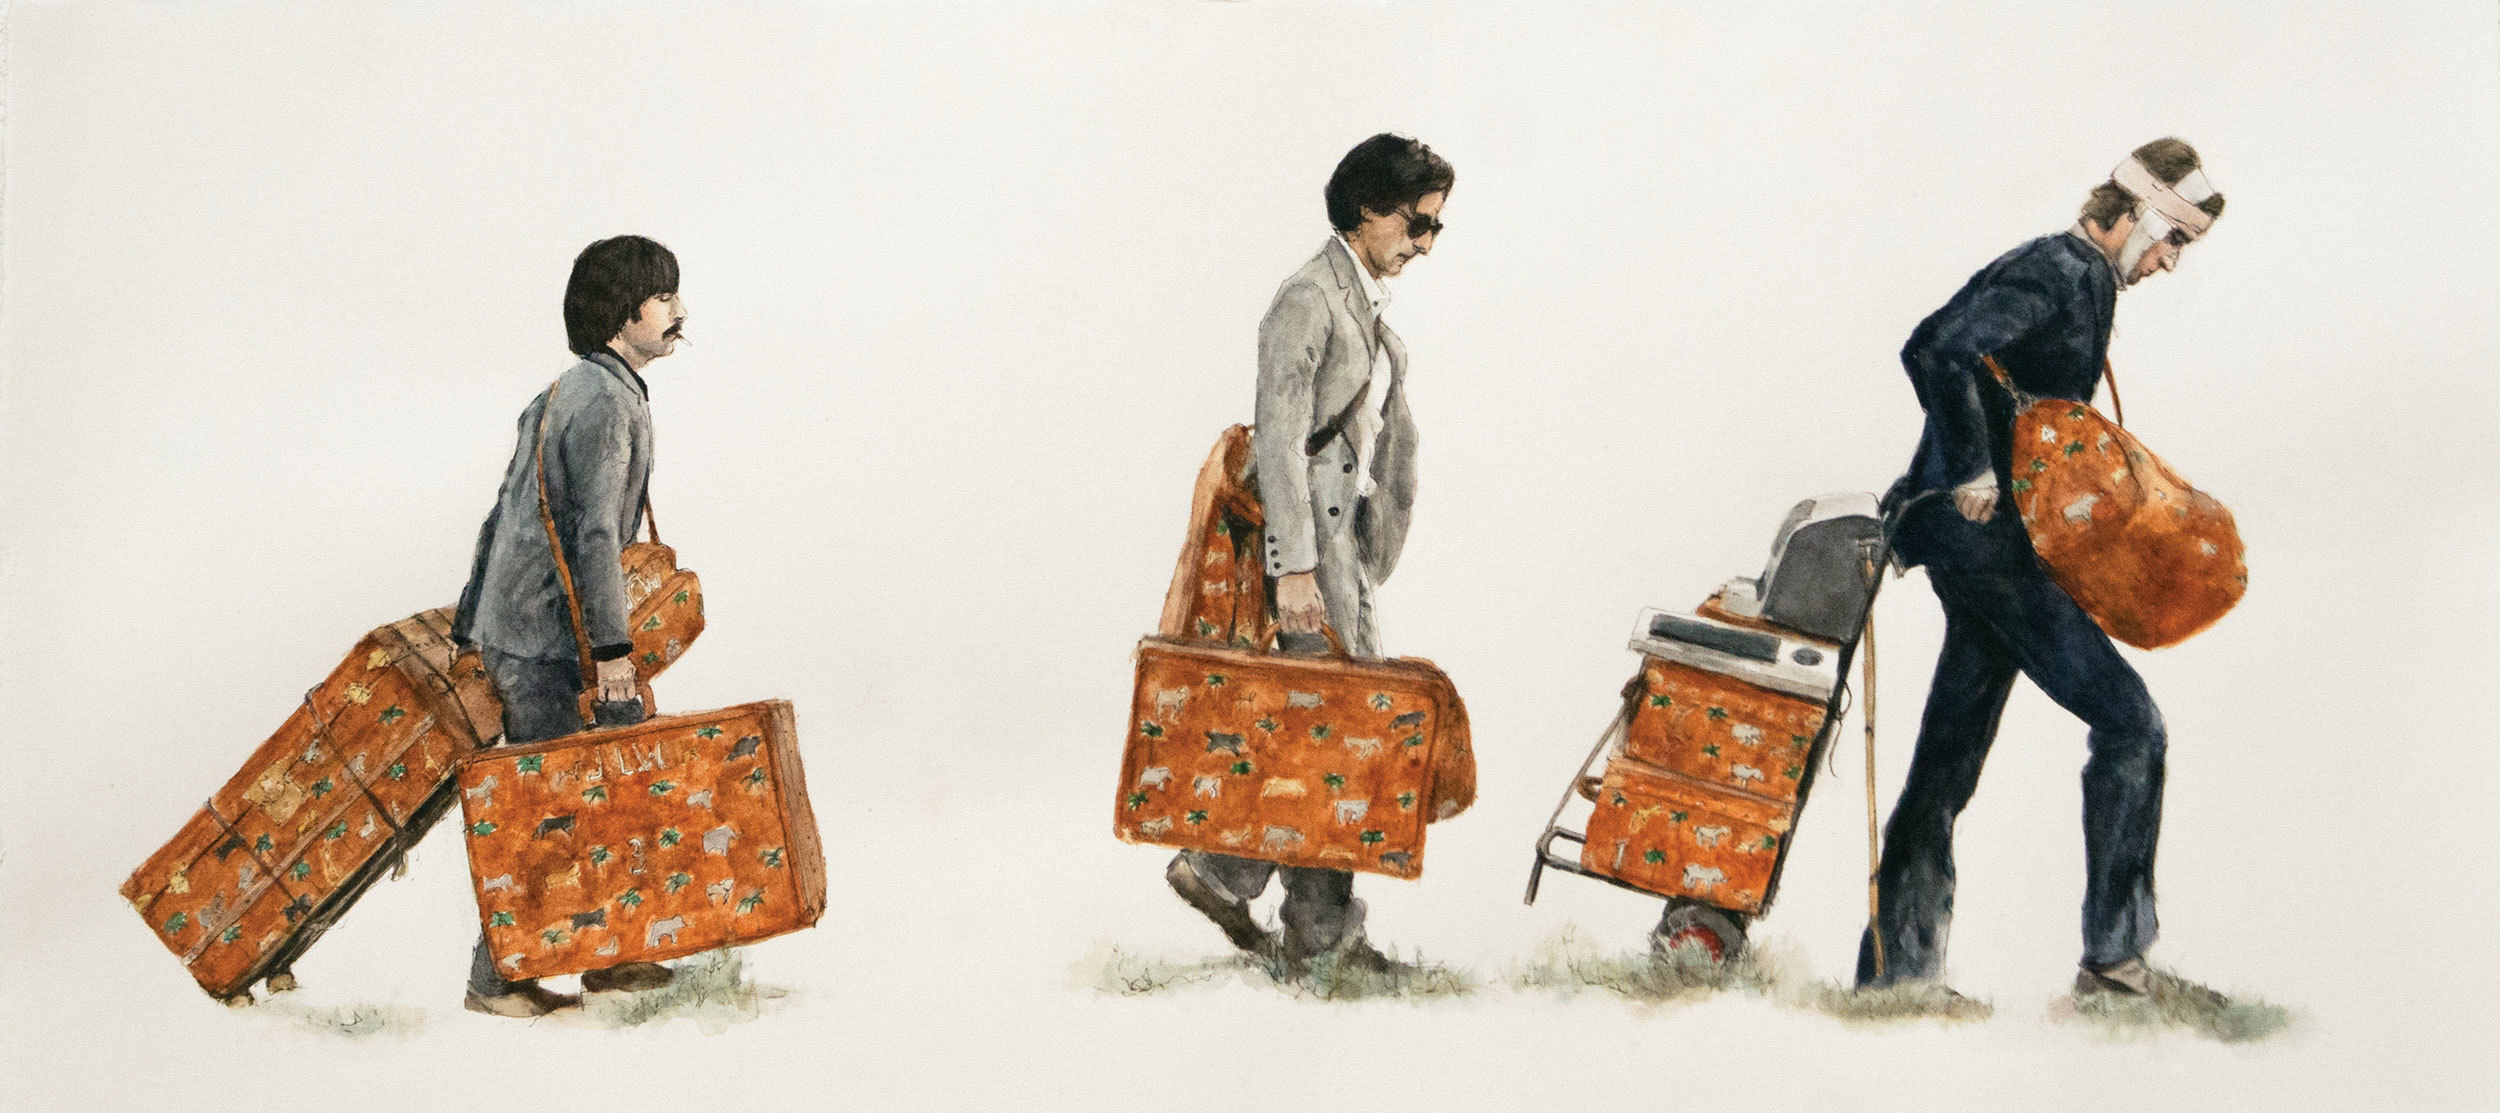 The Travel Bag inspired by Wes Anderson's The Darjeeling